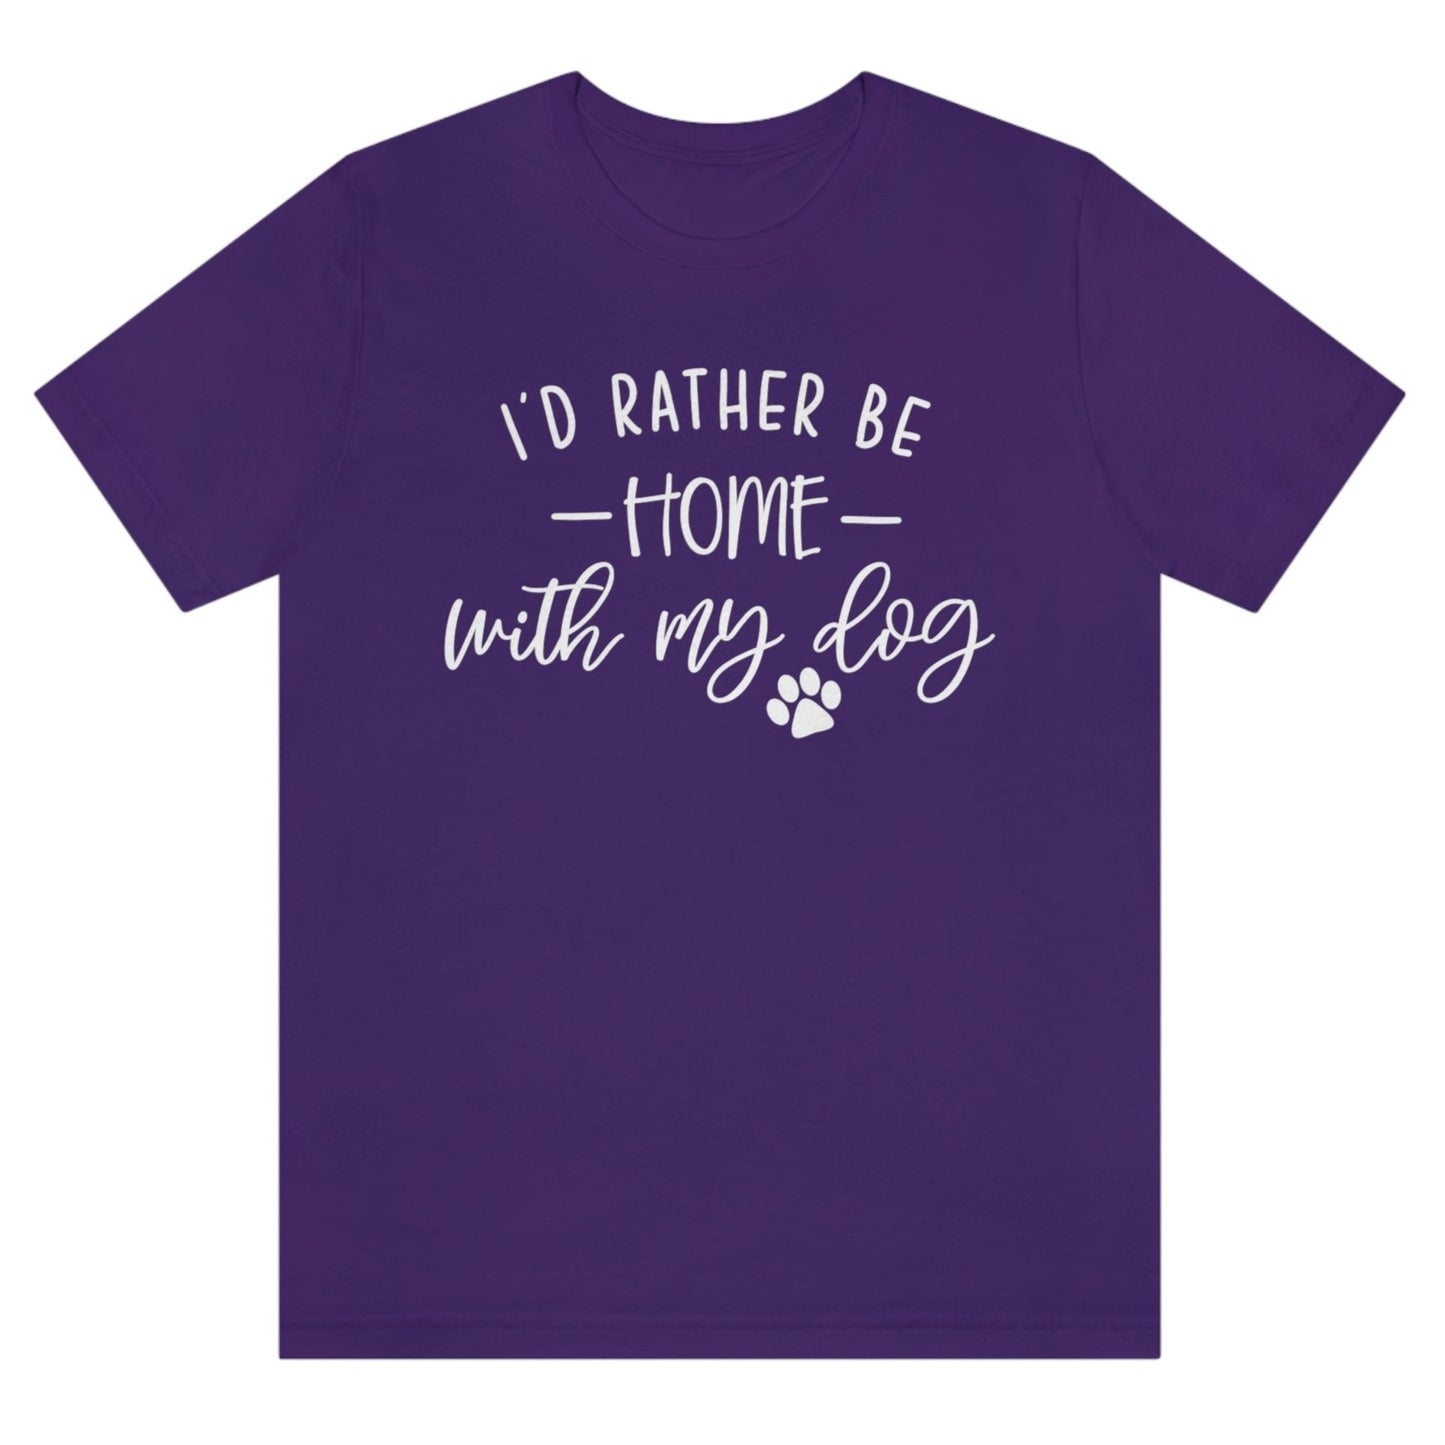 id-rather-be-home-with-my-dog-team-purple-t-shirt-animal-lover